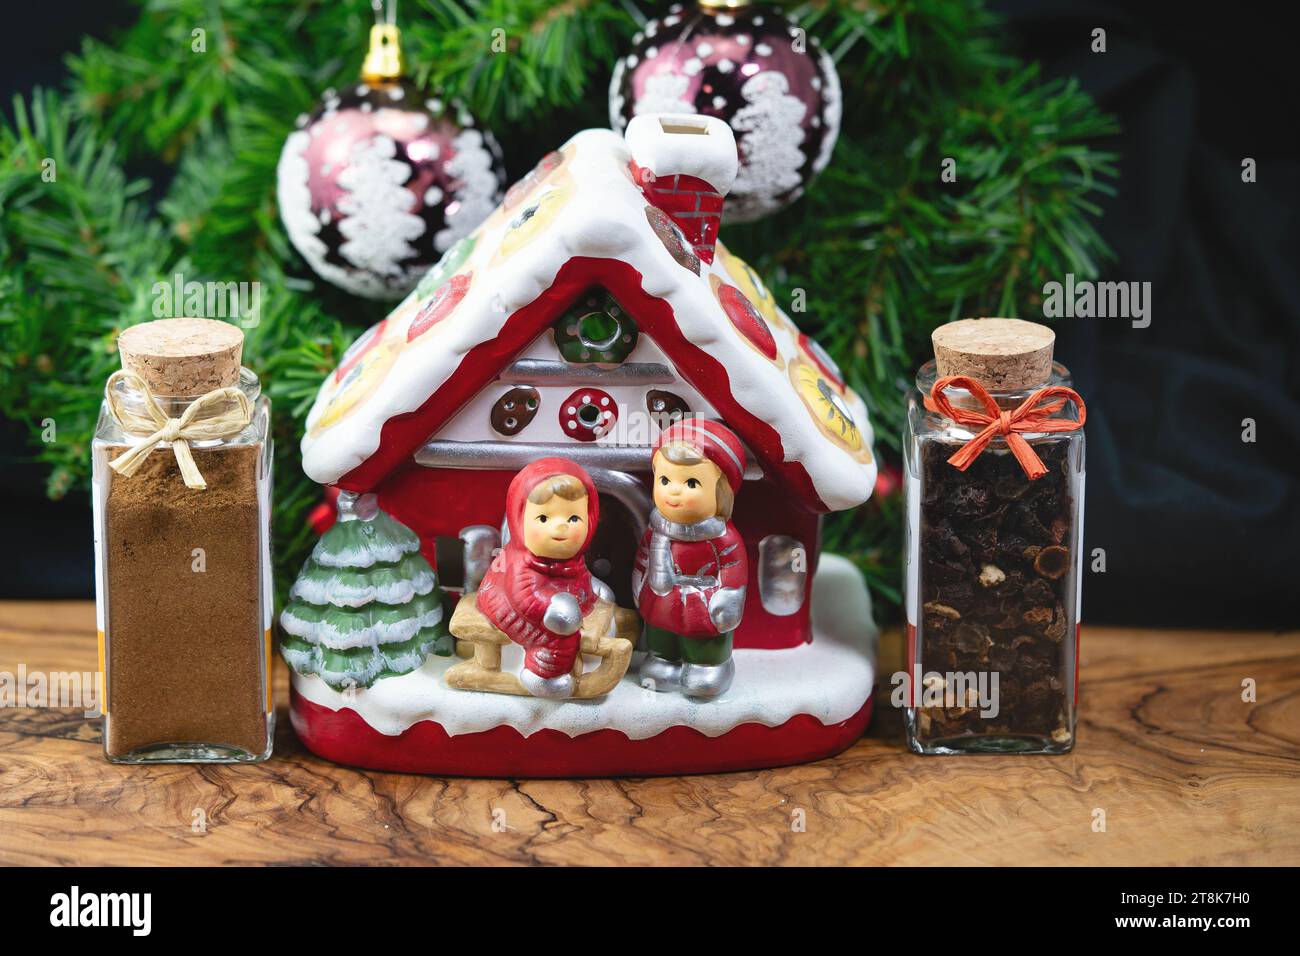 decorative gingerbread house with children Stock Photo